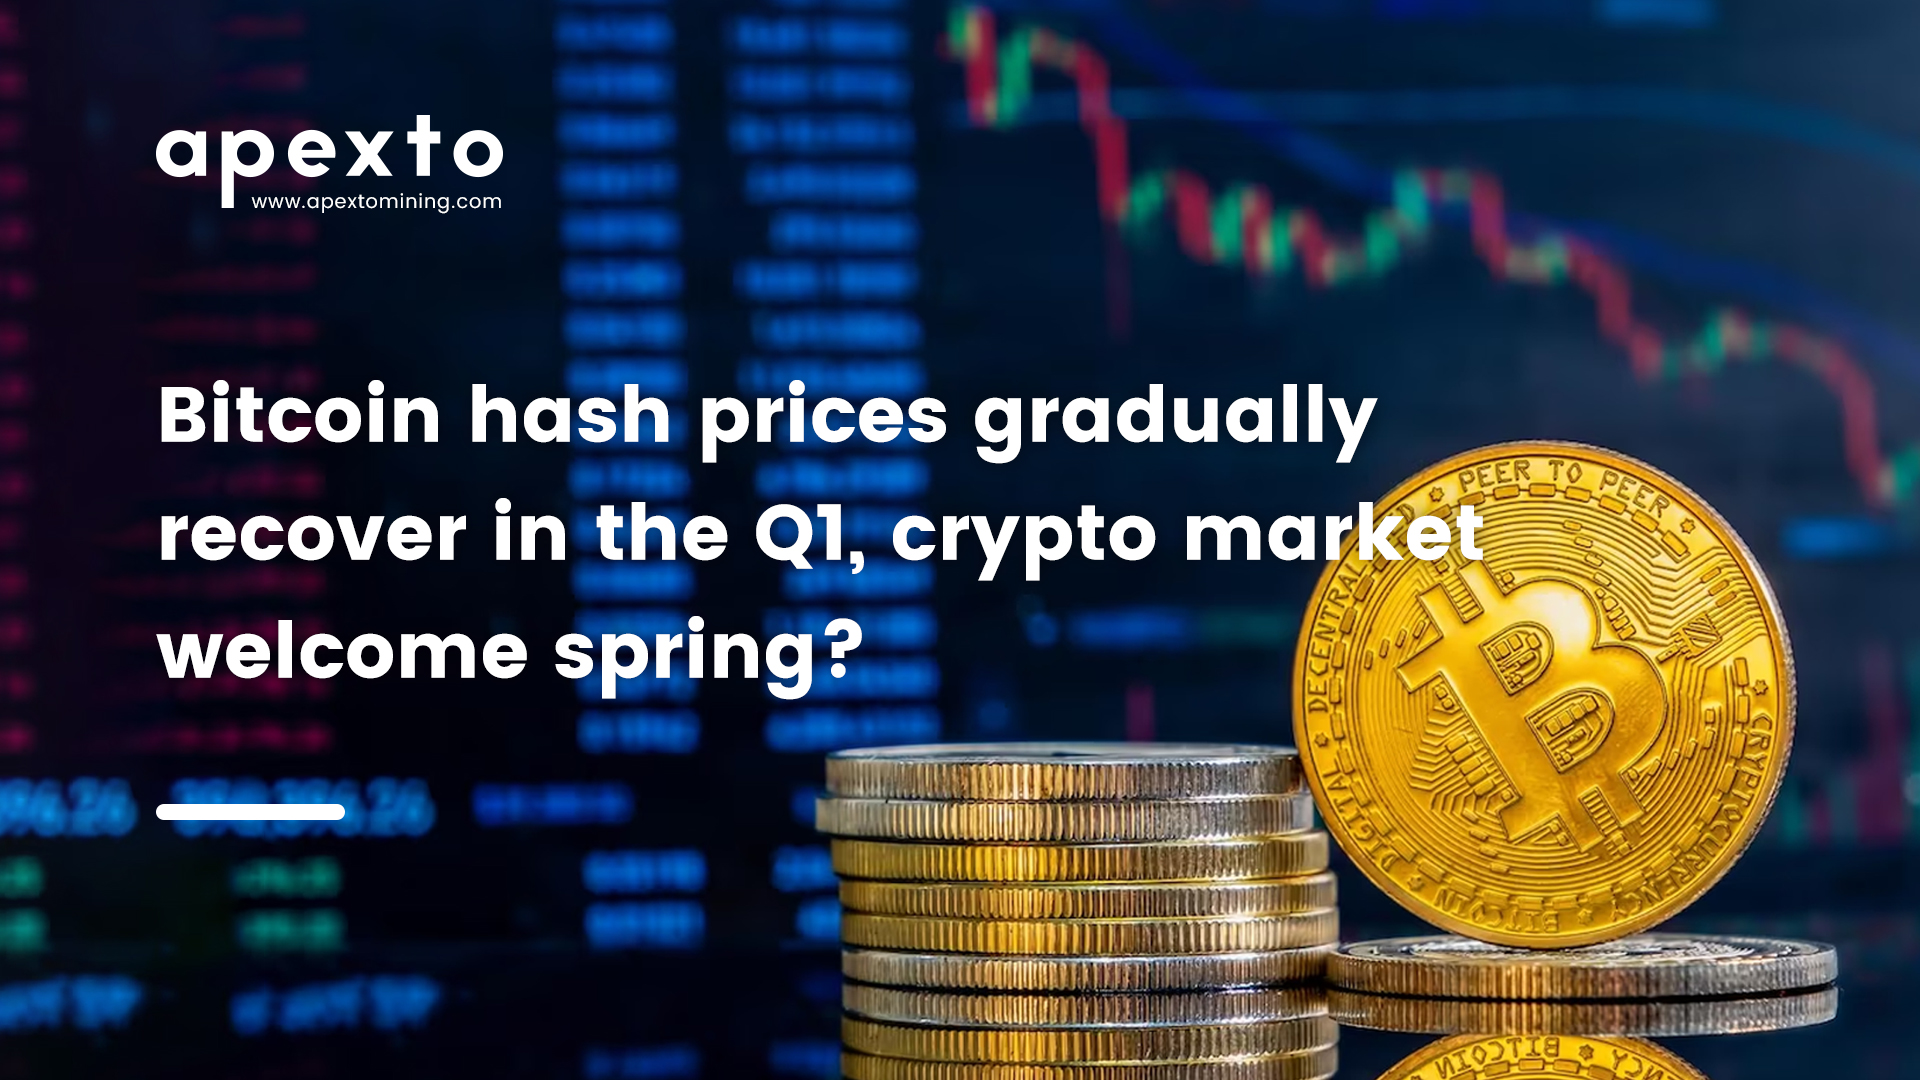 Market Research ：Bitcoin hash prices gradually recover in the Q1, crypto market welcome spring